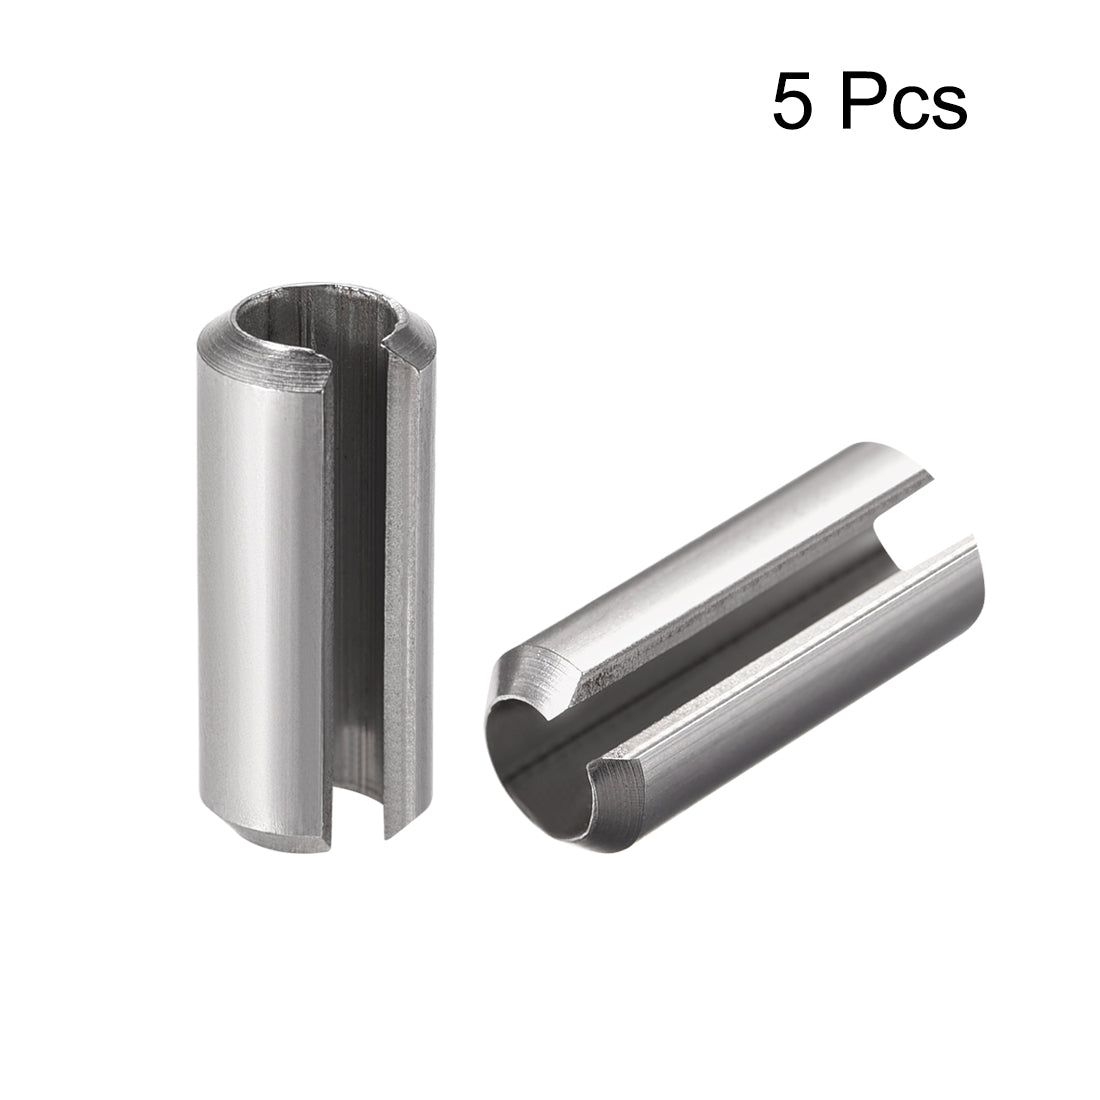 Uxcell Uxcell M8 x 25mm 304 Stainless Steel Split Spring Roll Dowel Pins Plain Finish 5Pcs